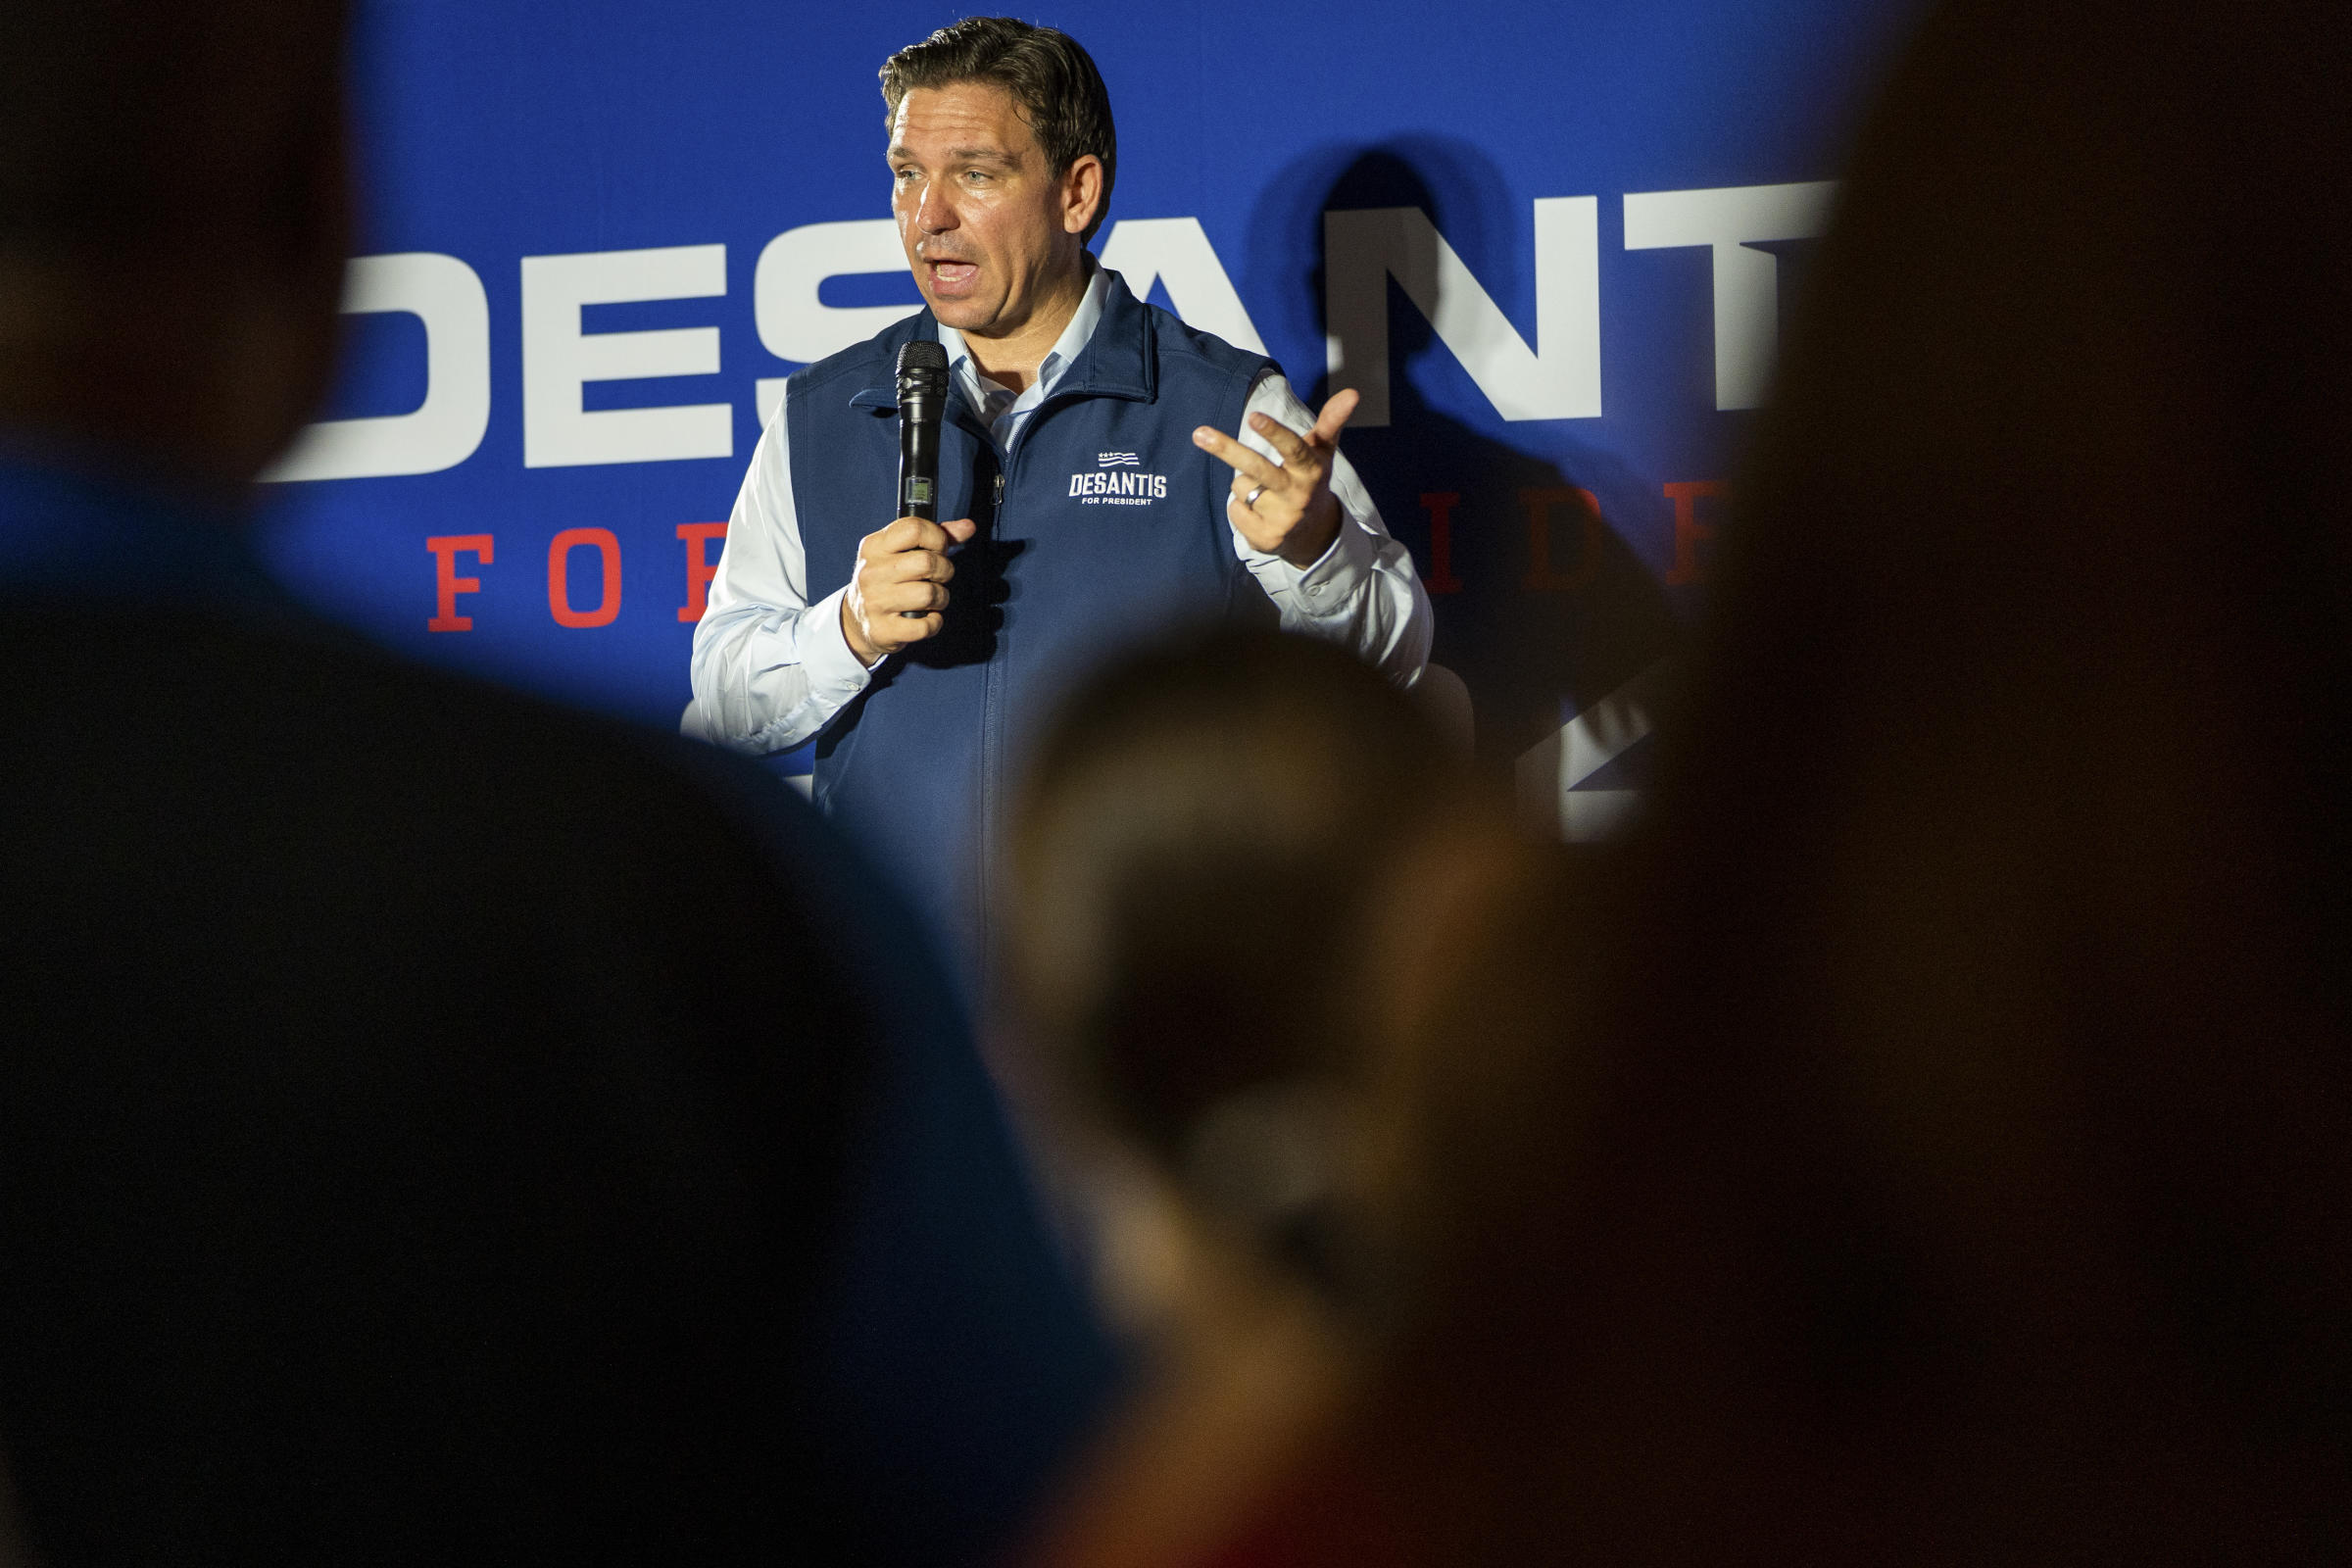 Republican presidential candidate Gov. Ron DeSantis (R-Fla.) speaking during a town hall event at Revelton Distilling Company in Osceola, Iowa, on July 27, 2023. (Christopher (KS) Smith/The New York Times)